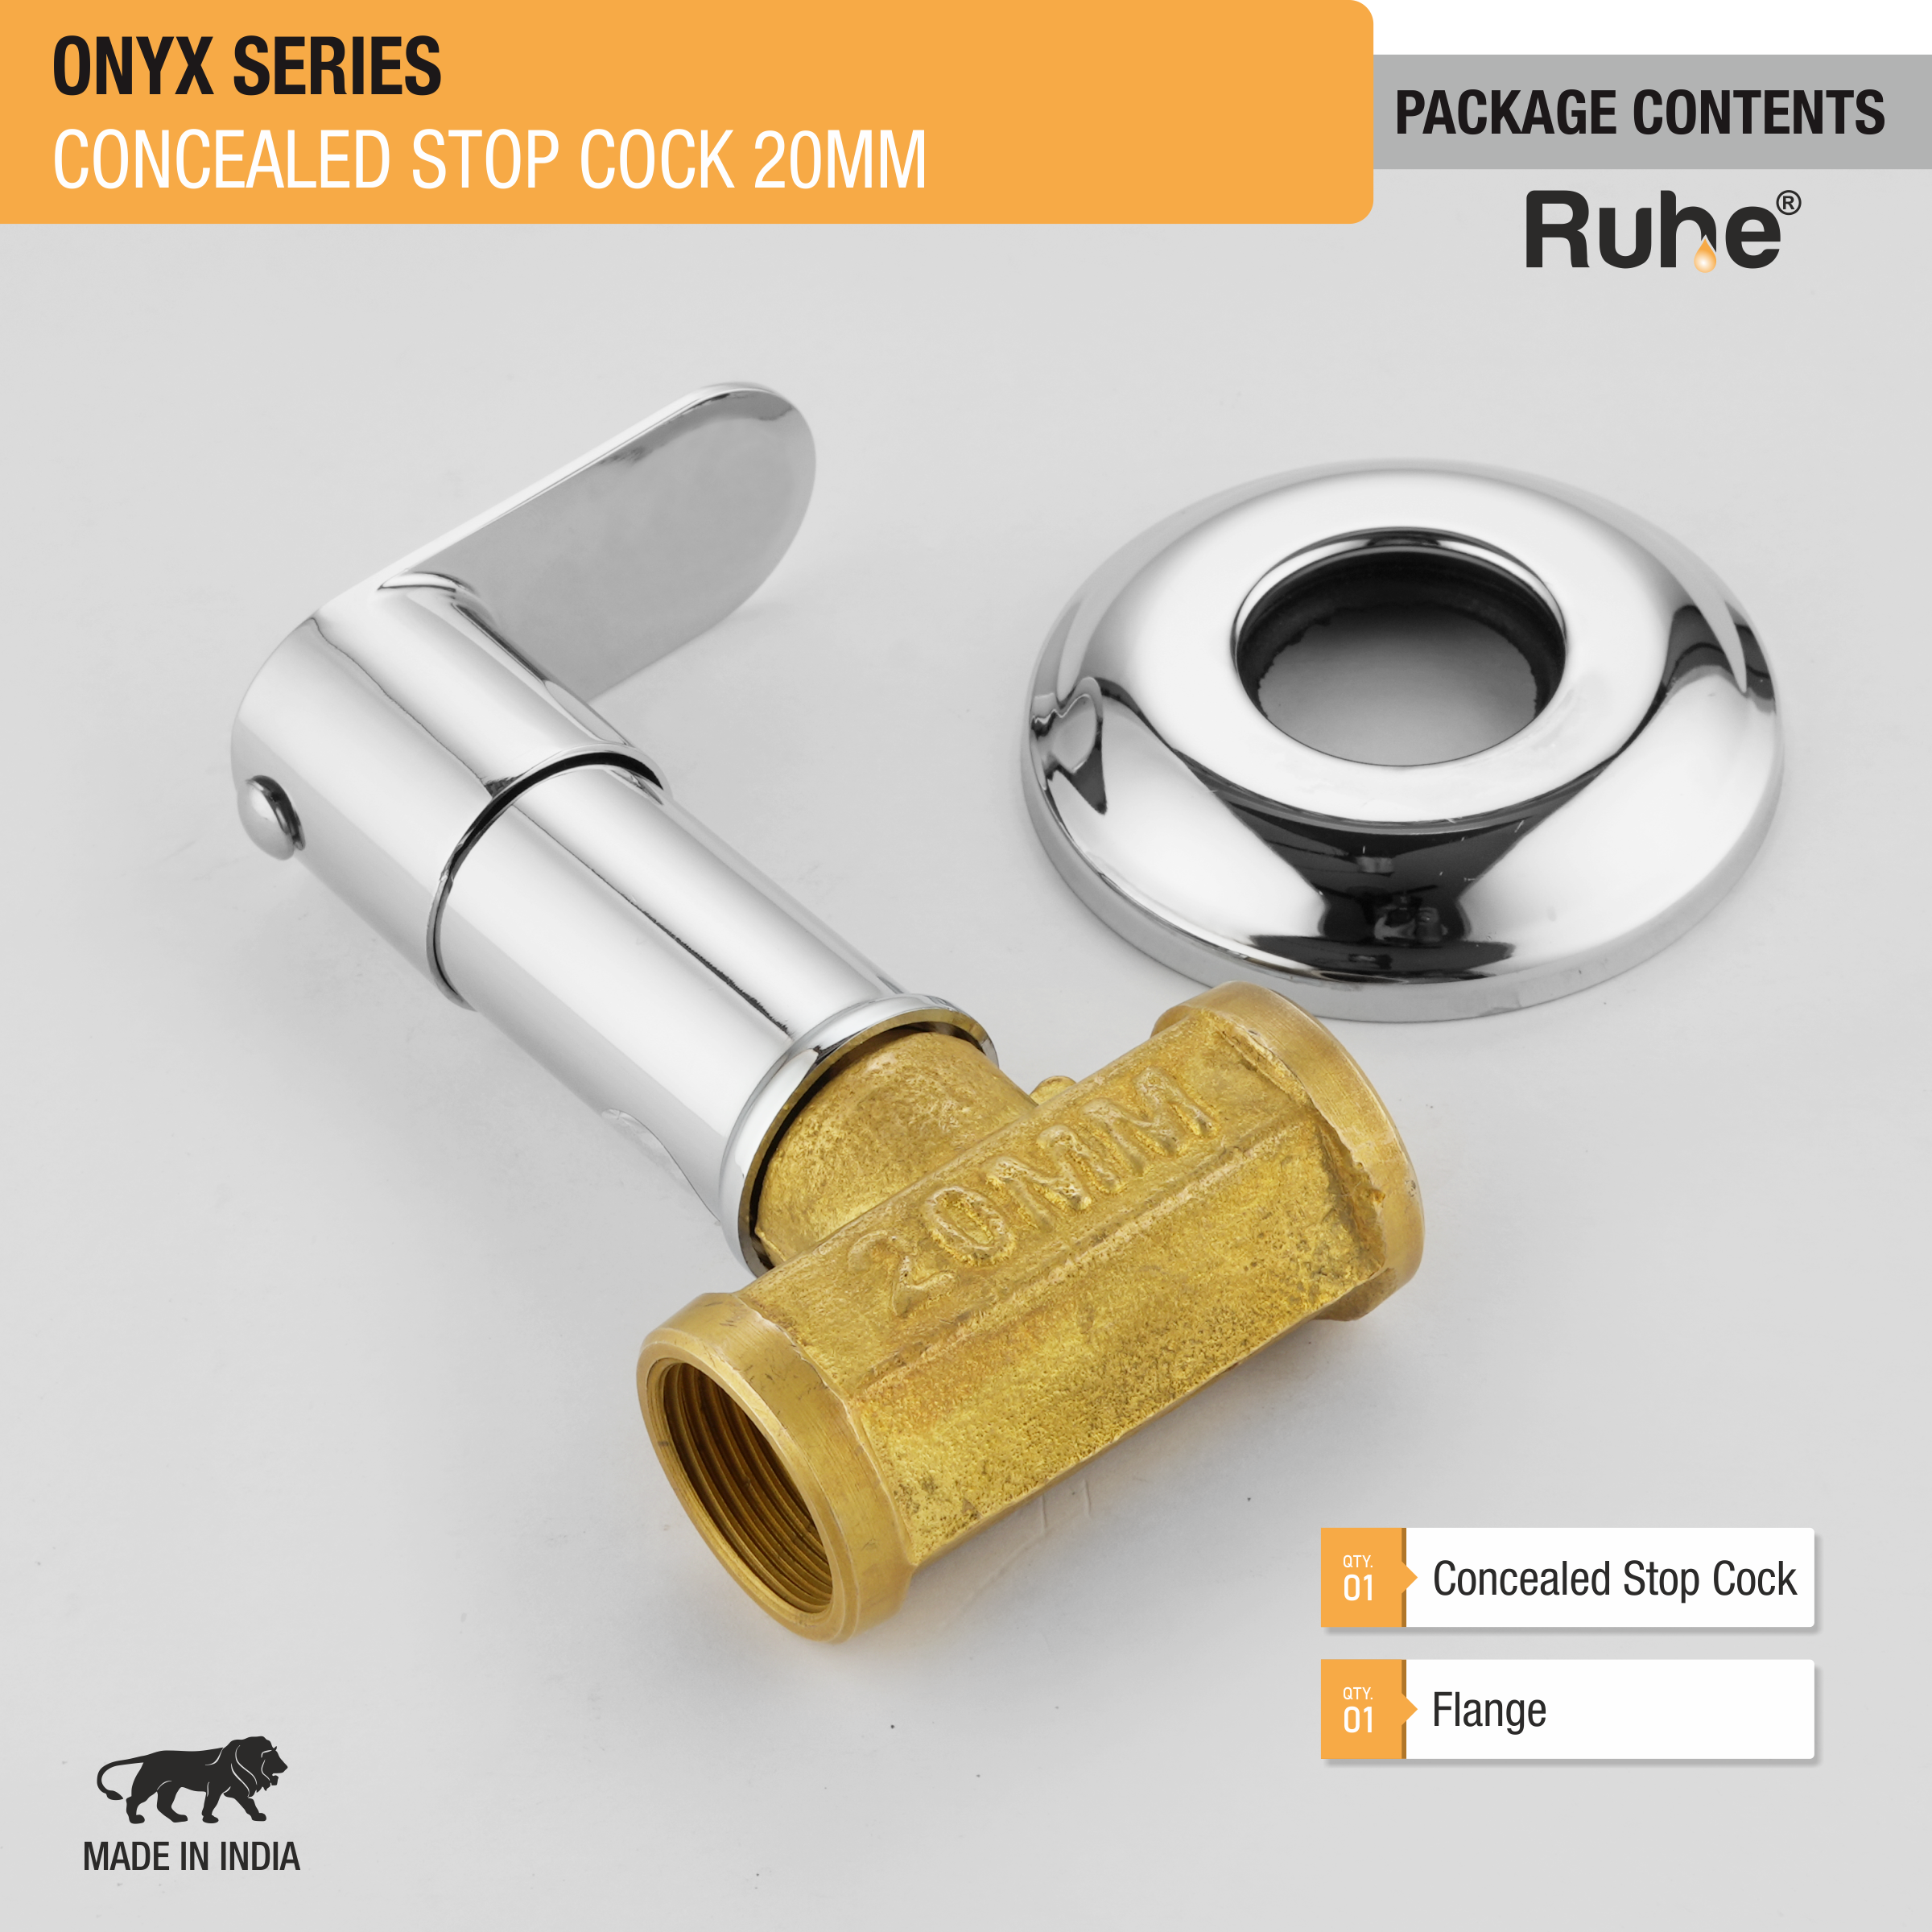 Onyx Concealed Stop Valve Brass Faucet (20mm) package content